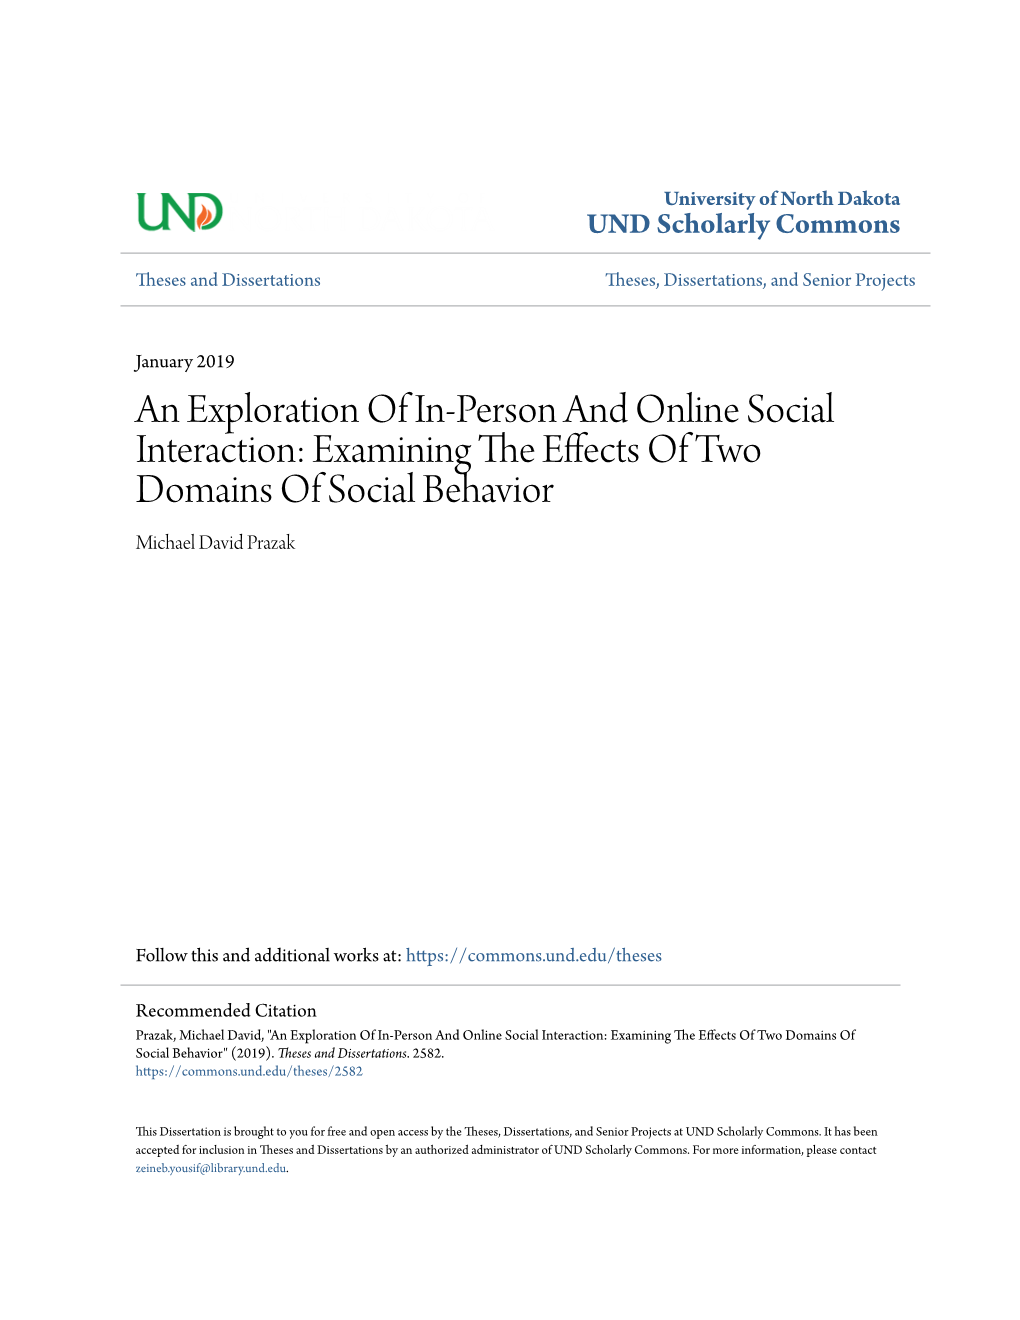 An Exploration of In-Person and Online Social Interaction: Examining the Ffece Ts of Two Domains of Social Behavior Michael David Prazak